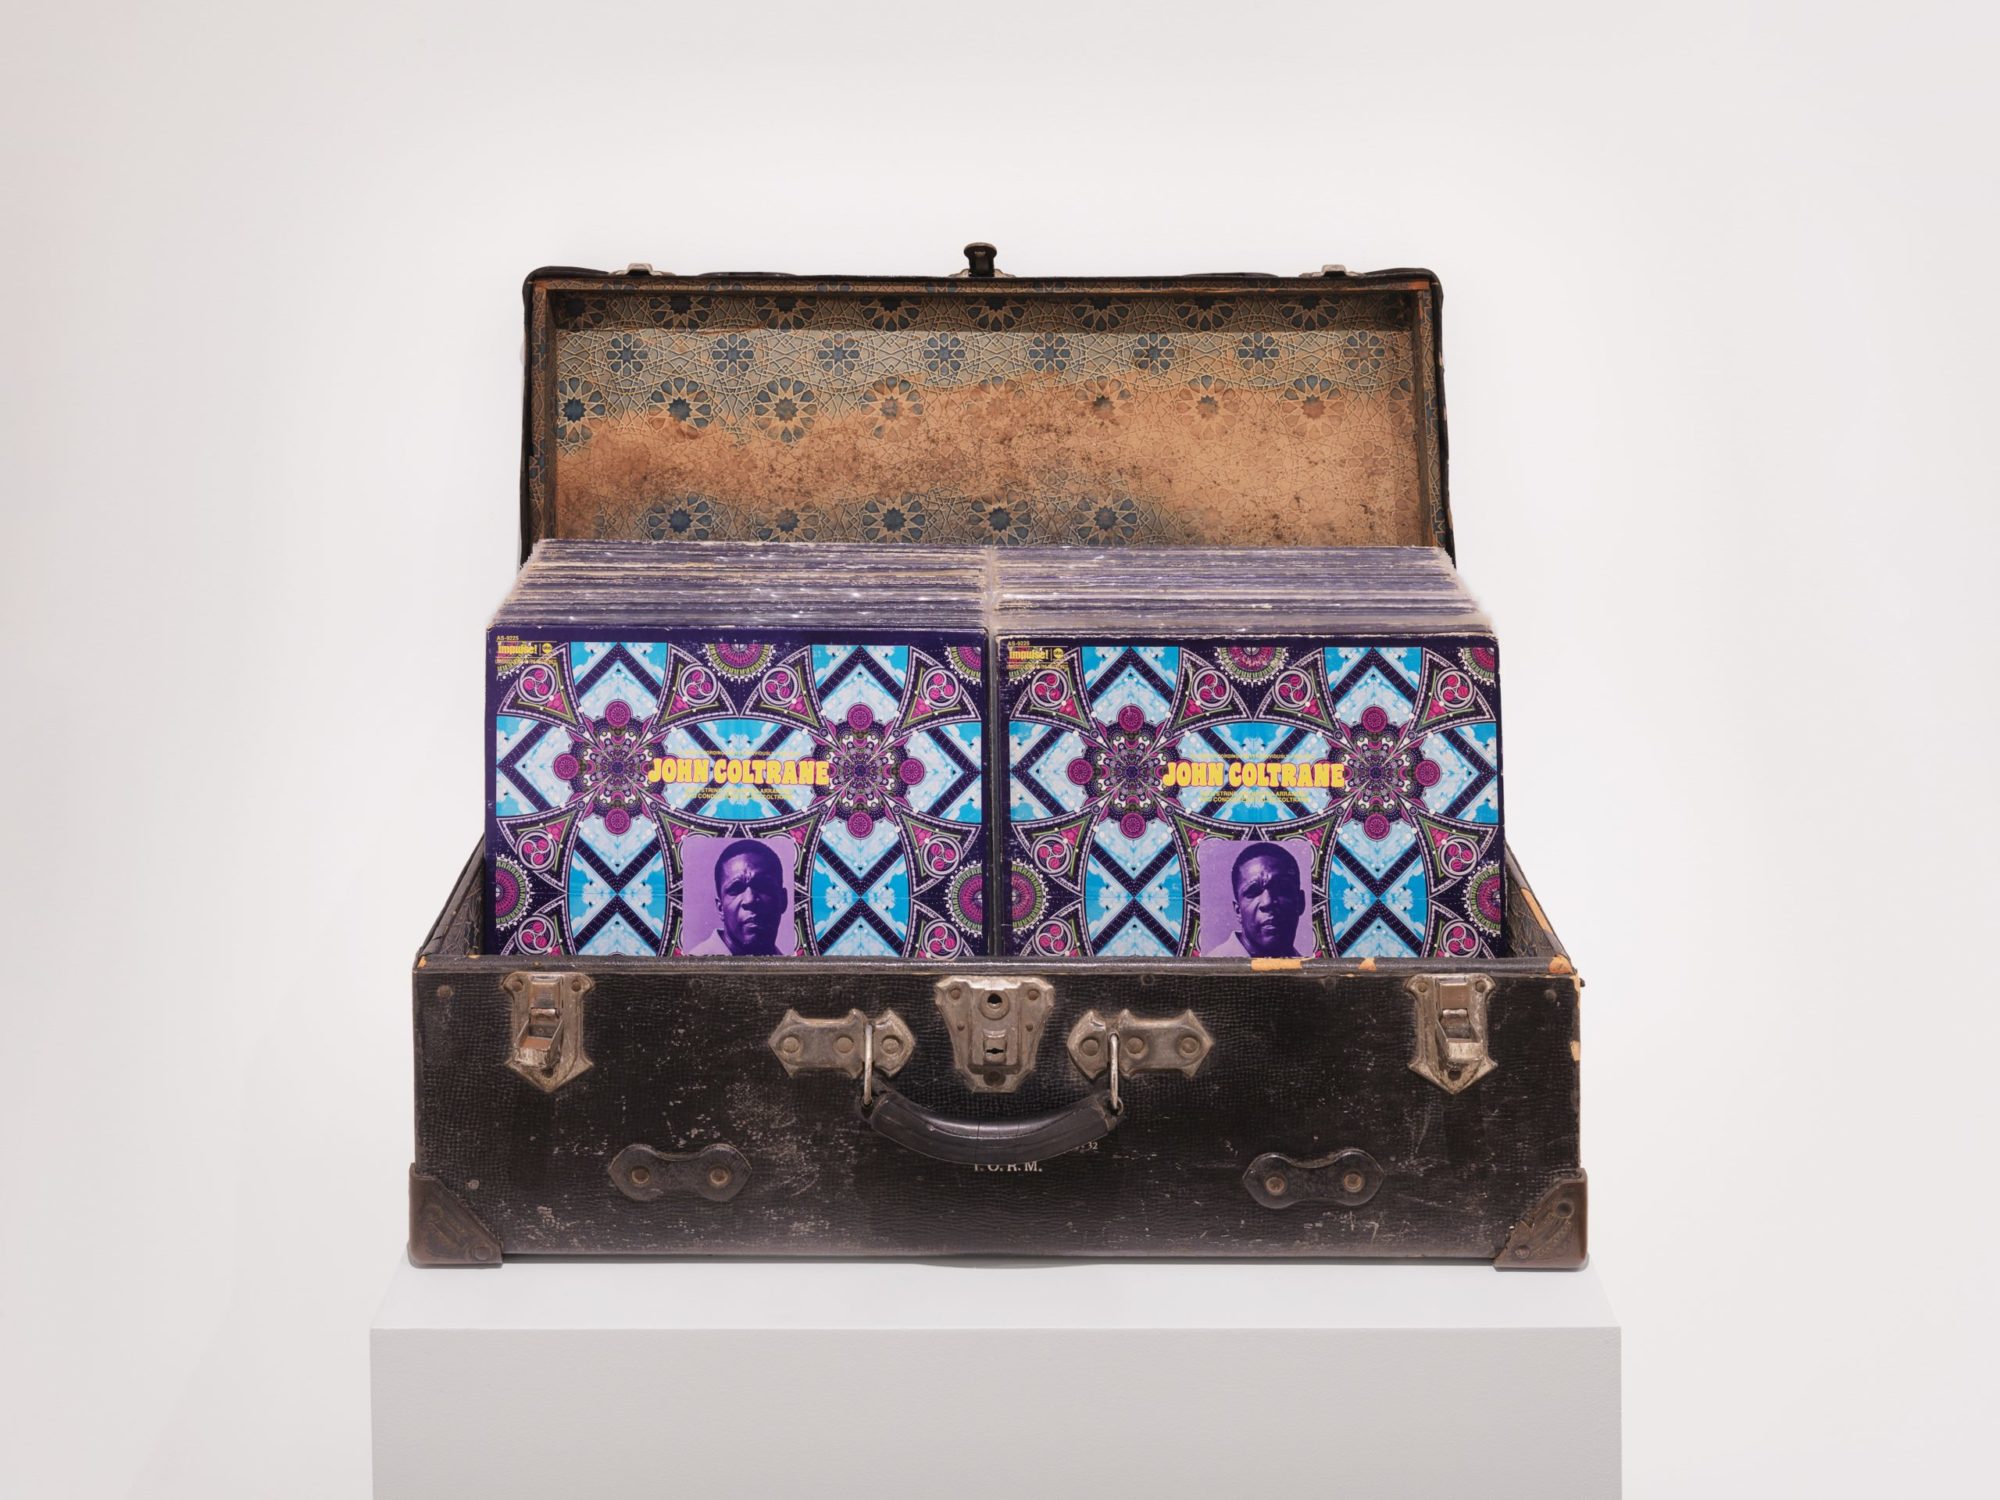 A vintage dark brown trunk opened to show a box adorned with mirrored images of John Coltrane's 